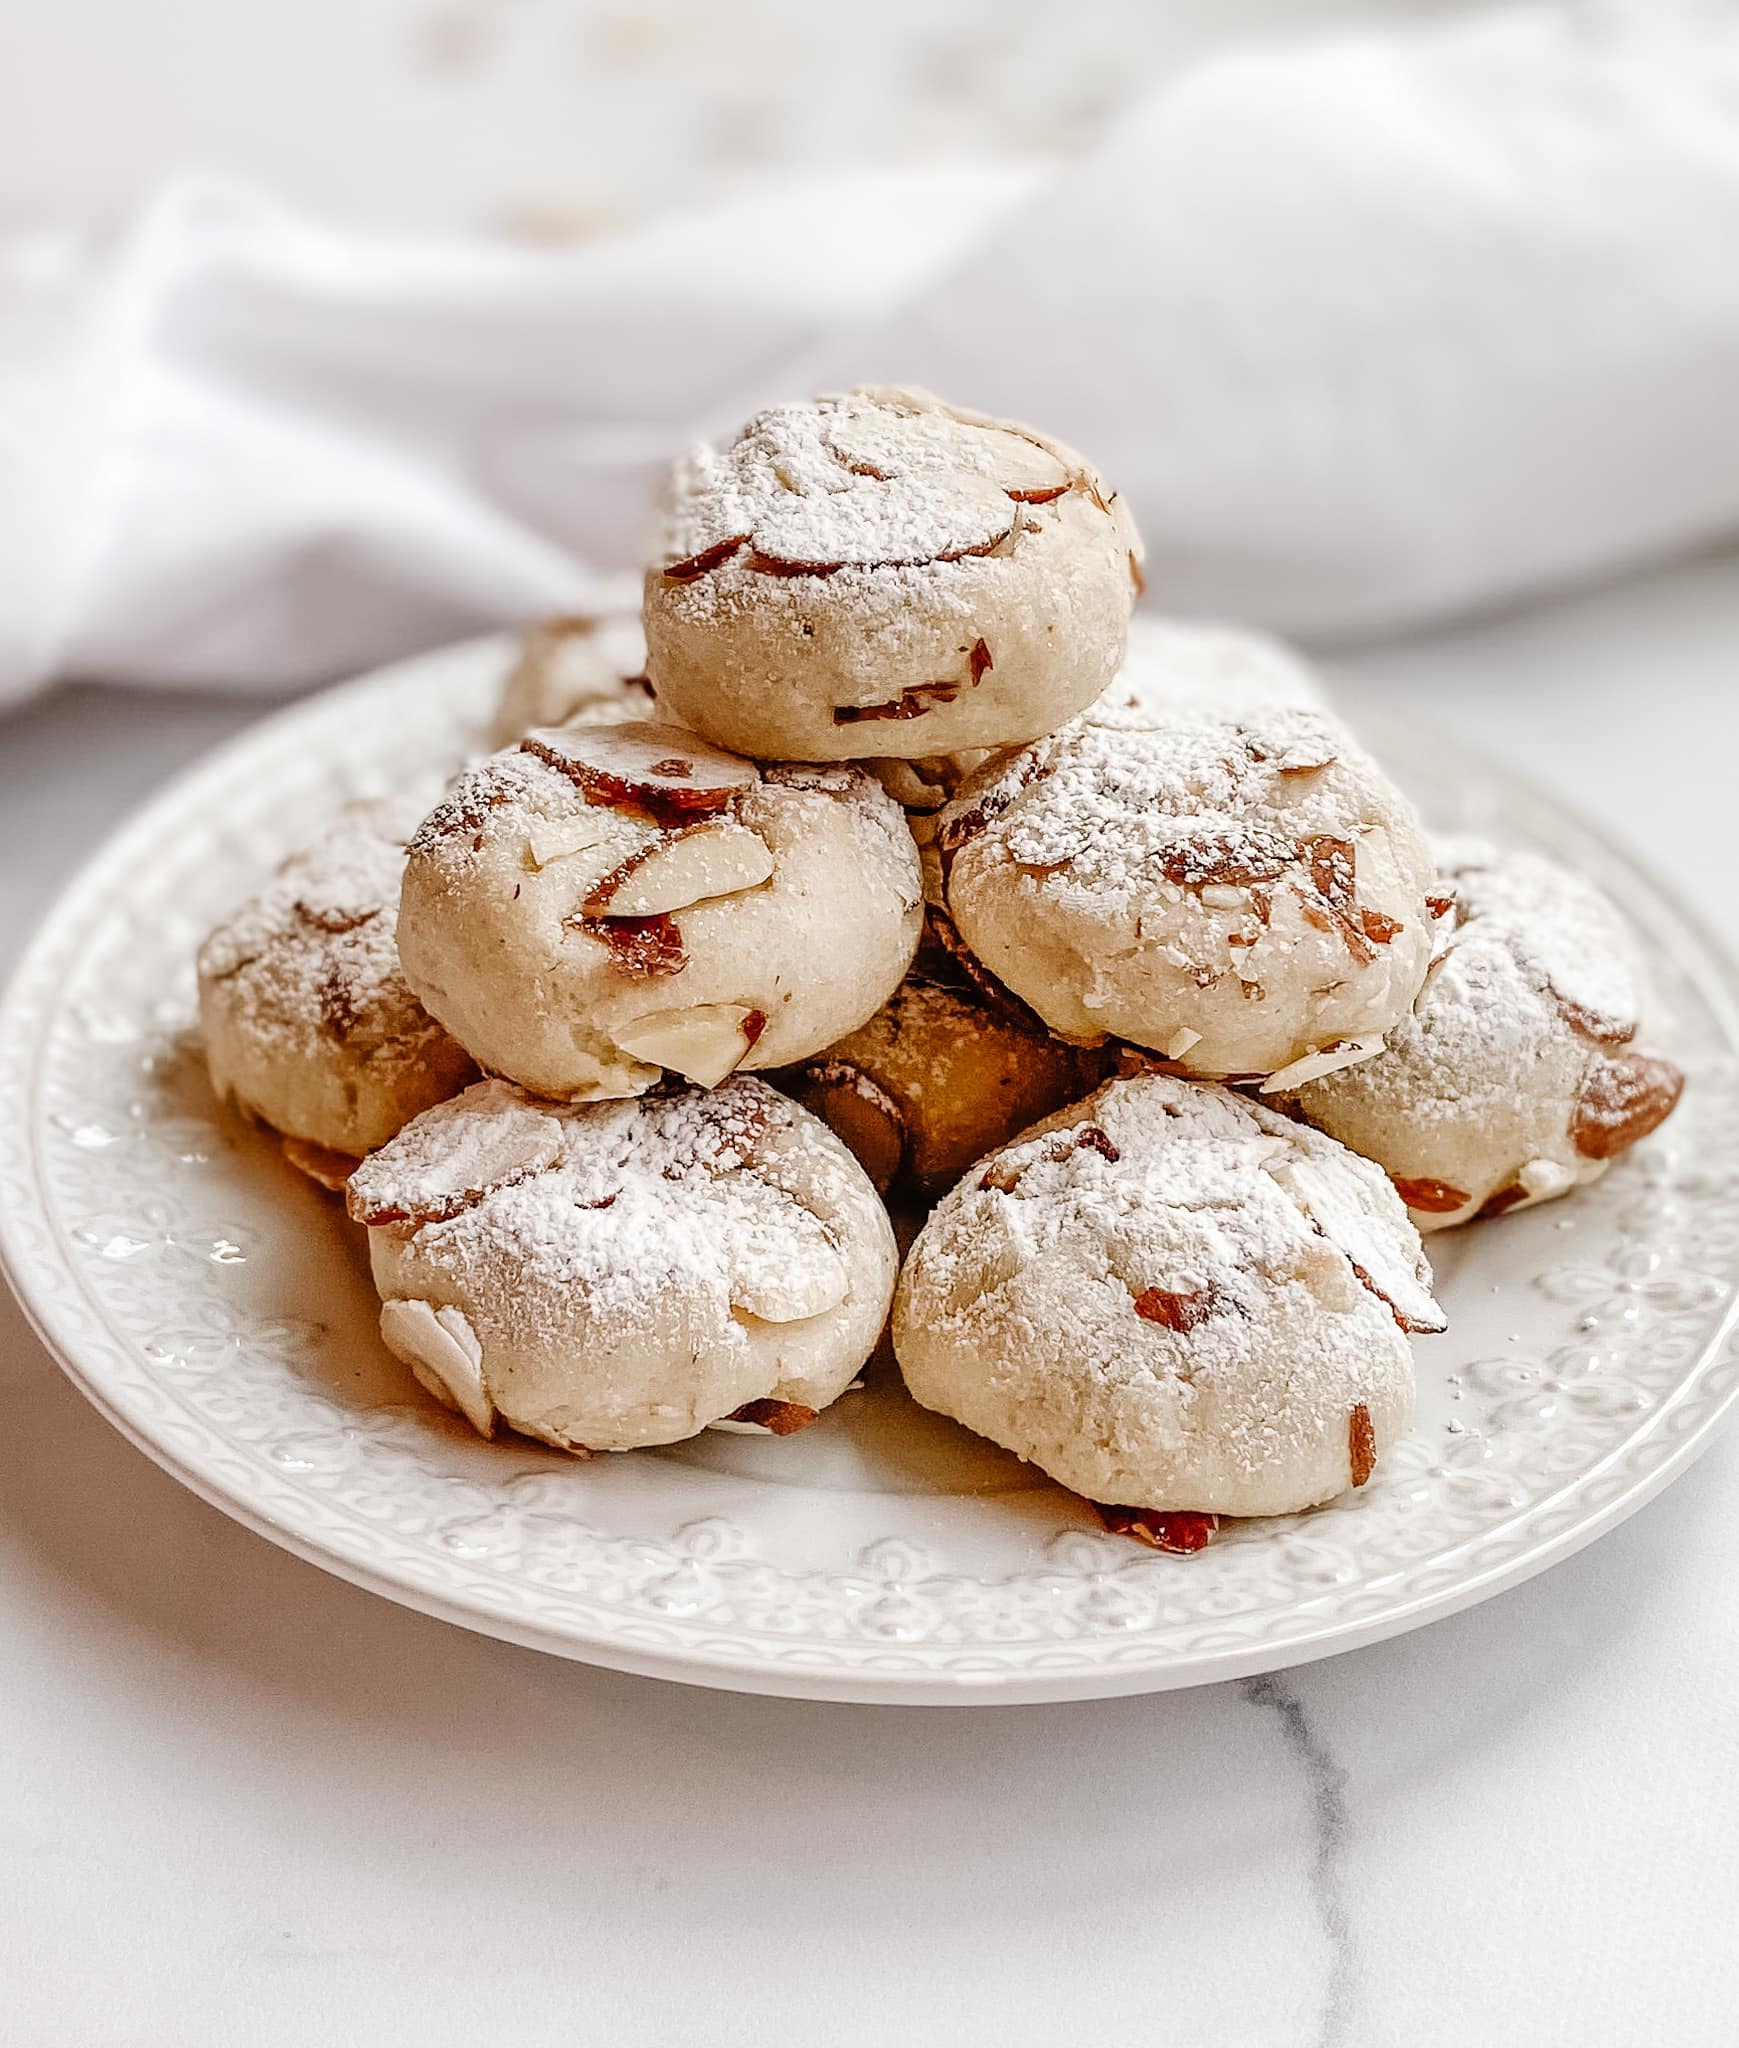 A front view of the stack of amaretti cookies. The cookies are topped with powdered sugar and almonds.